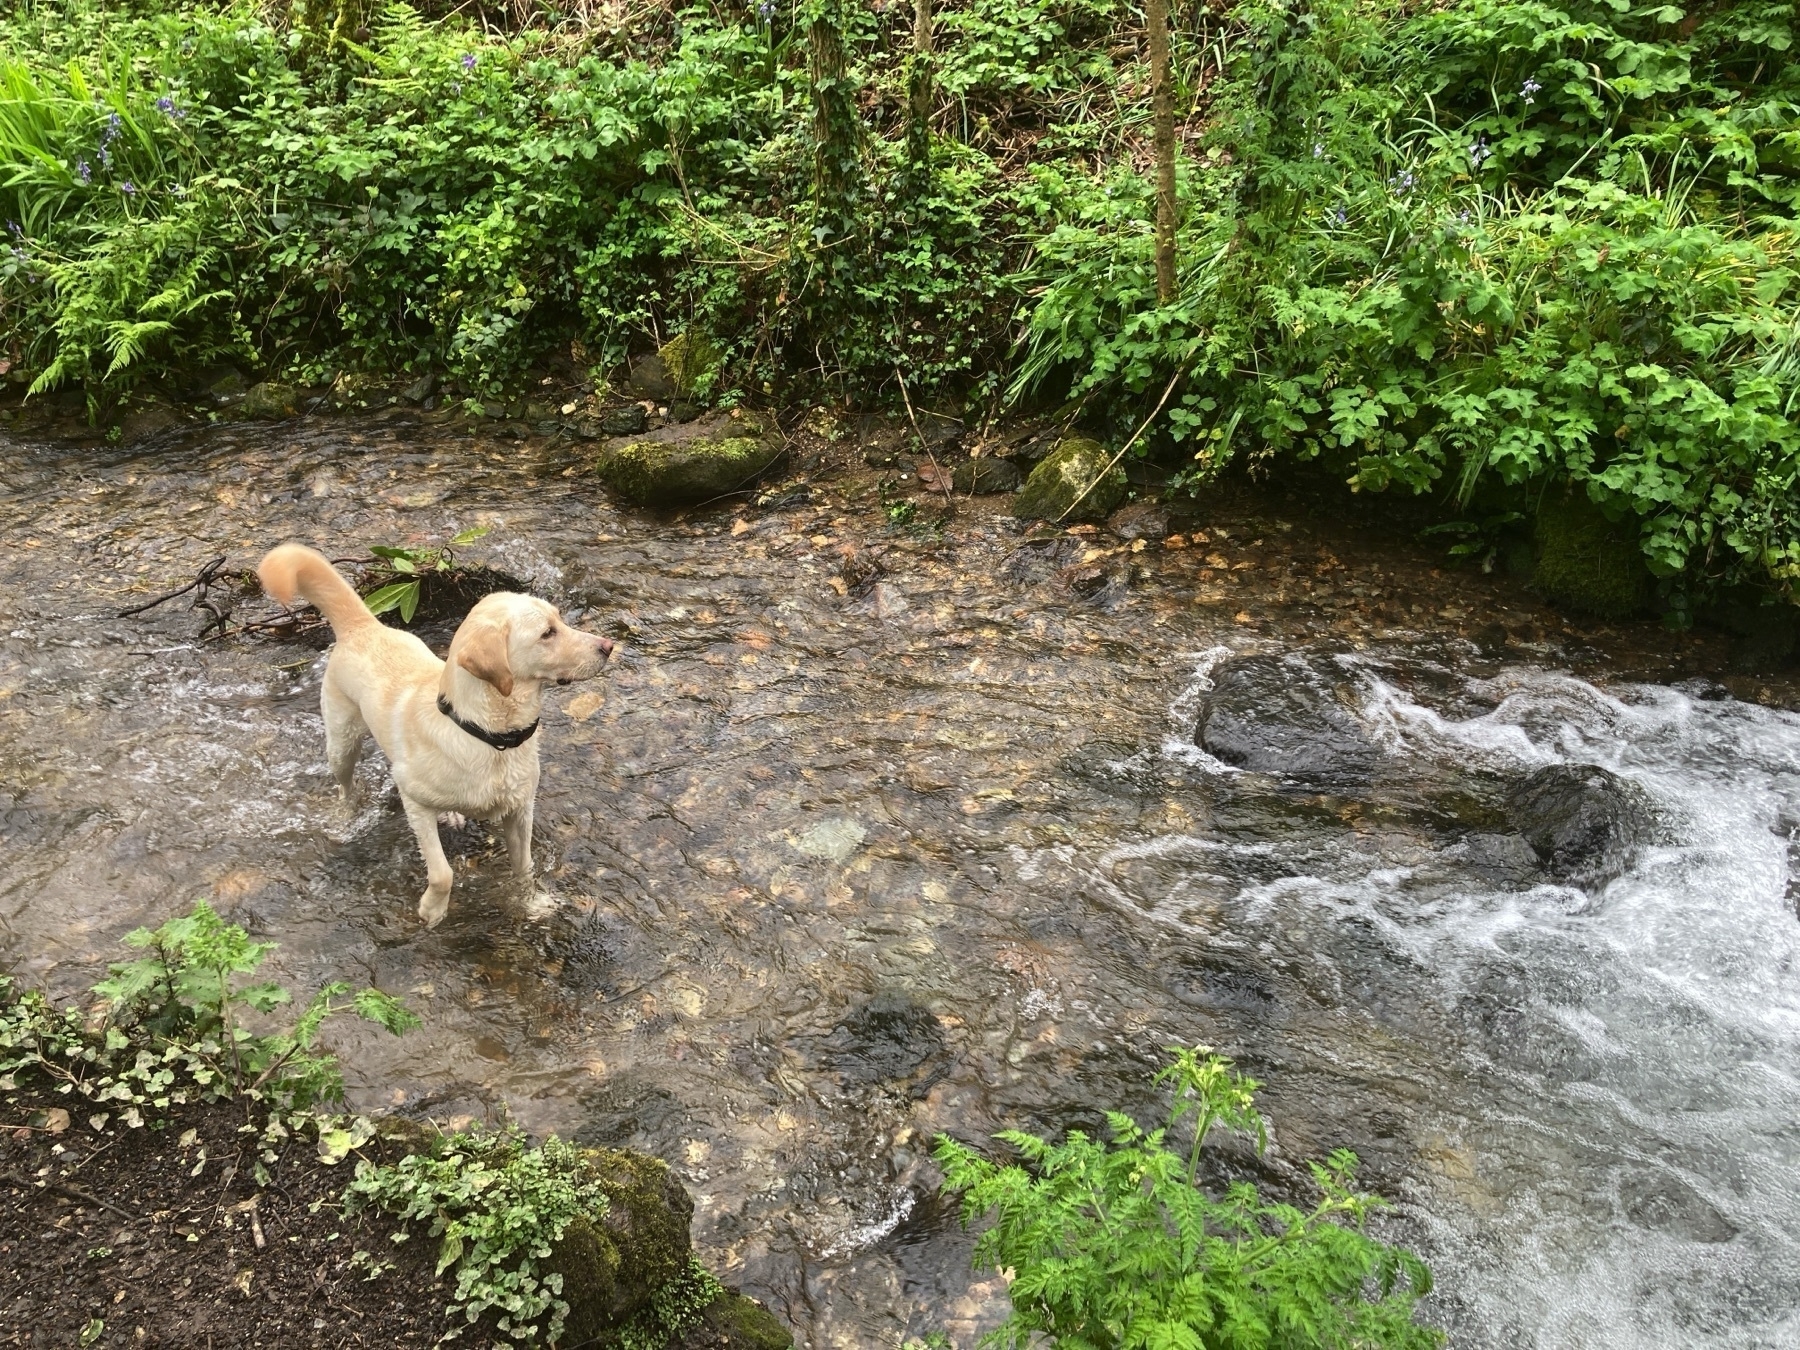 A golden retriever standing in a small river with a flow of swiftly moving water. His attention is turned to the side, with one front paw slightly raised in the air.